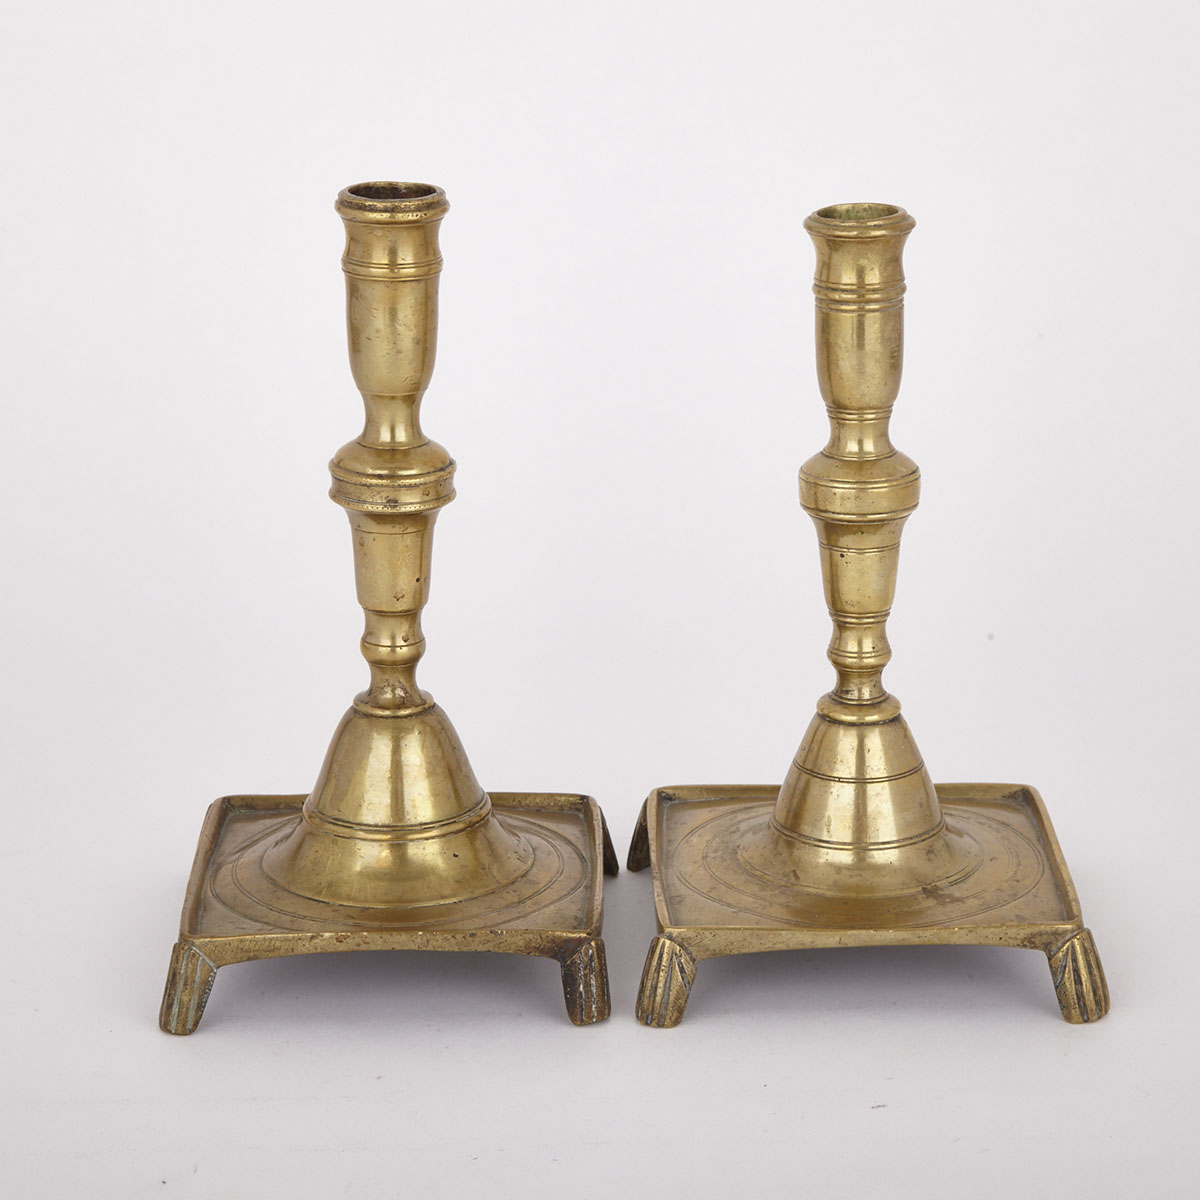 Near Pair of Spanish Bell Metal Candle Sticks, late 17th century